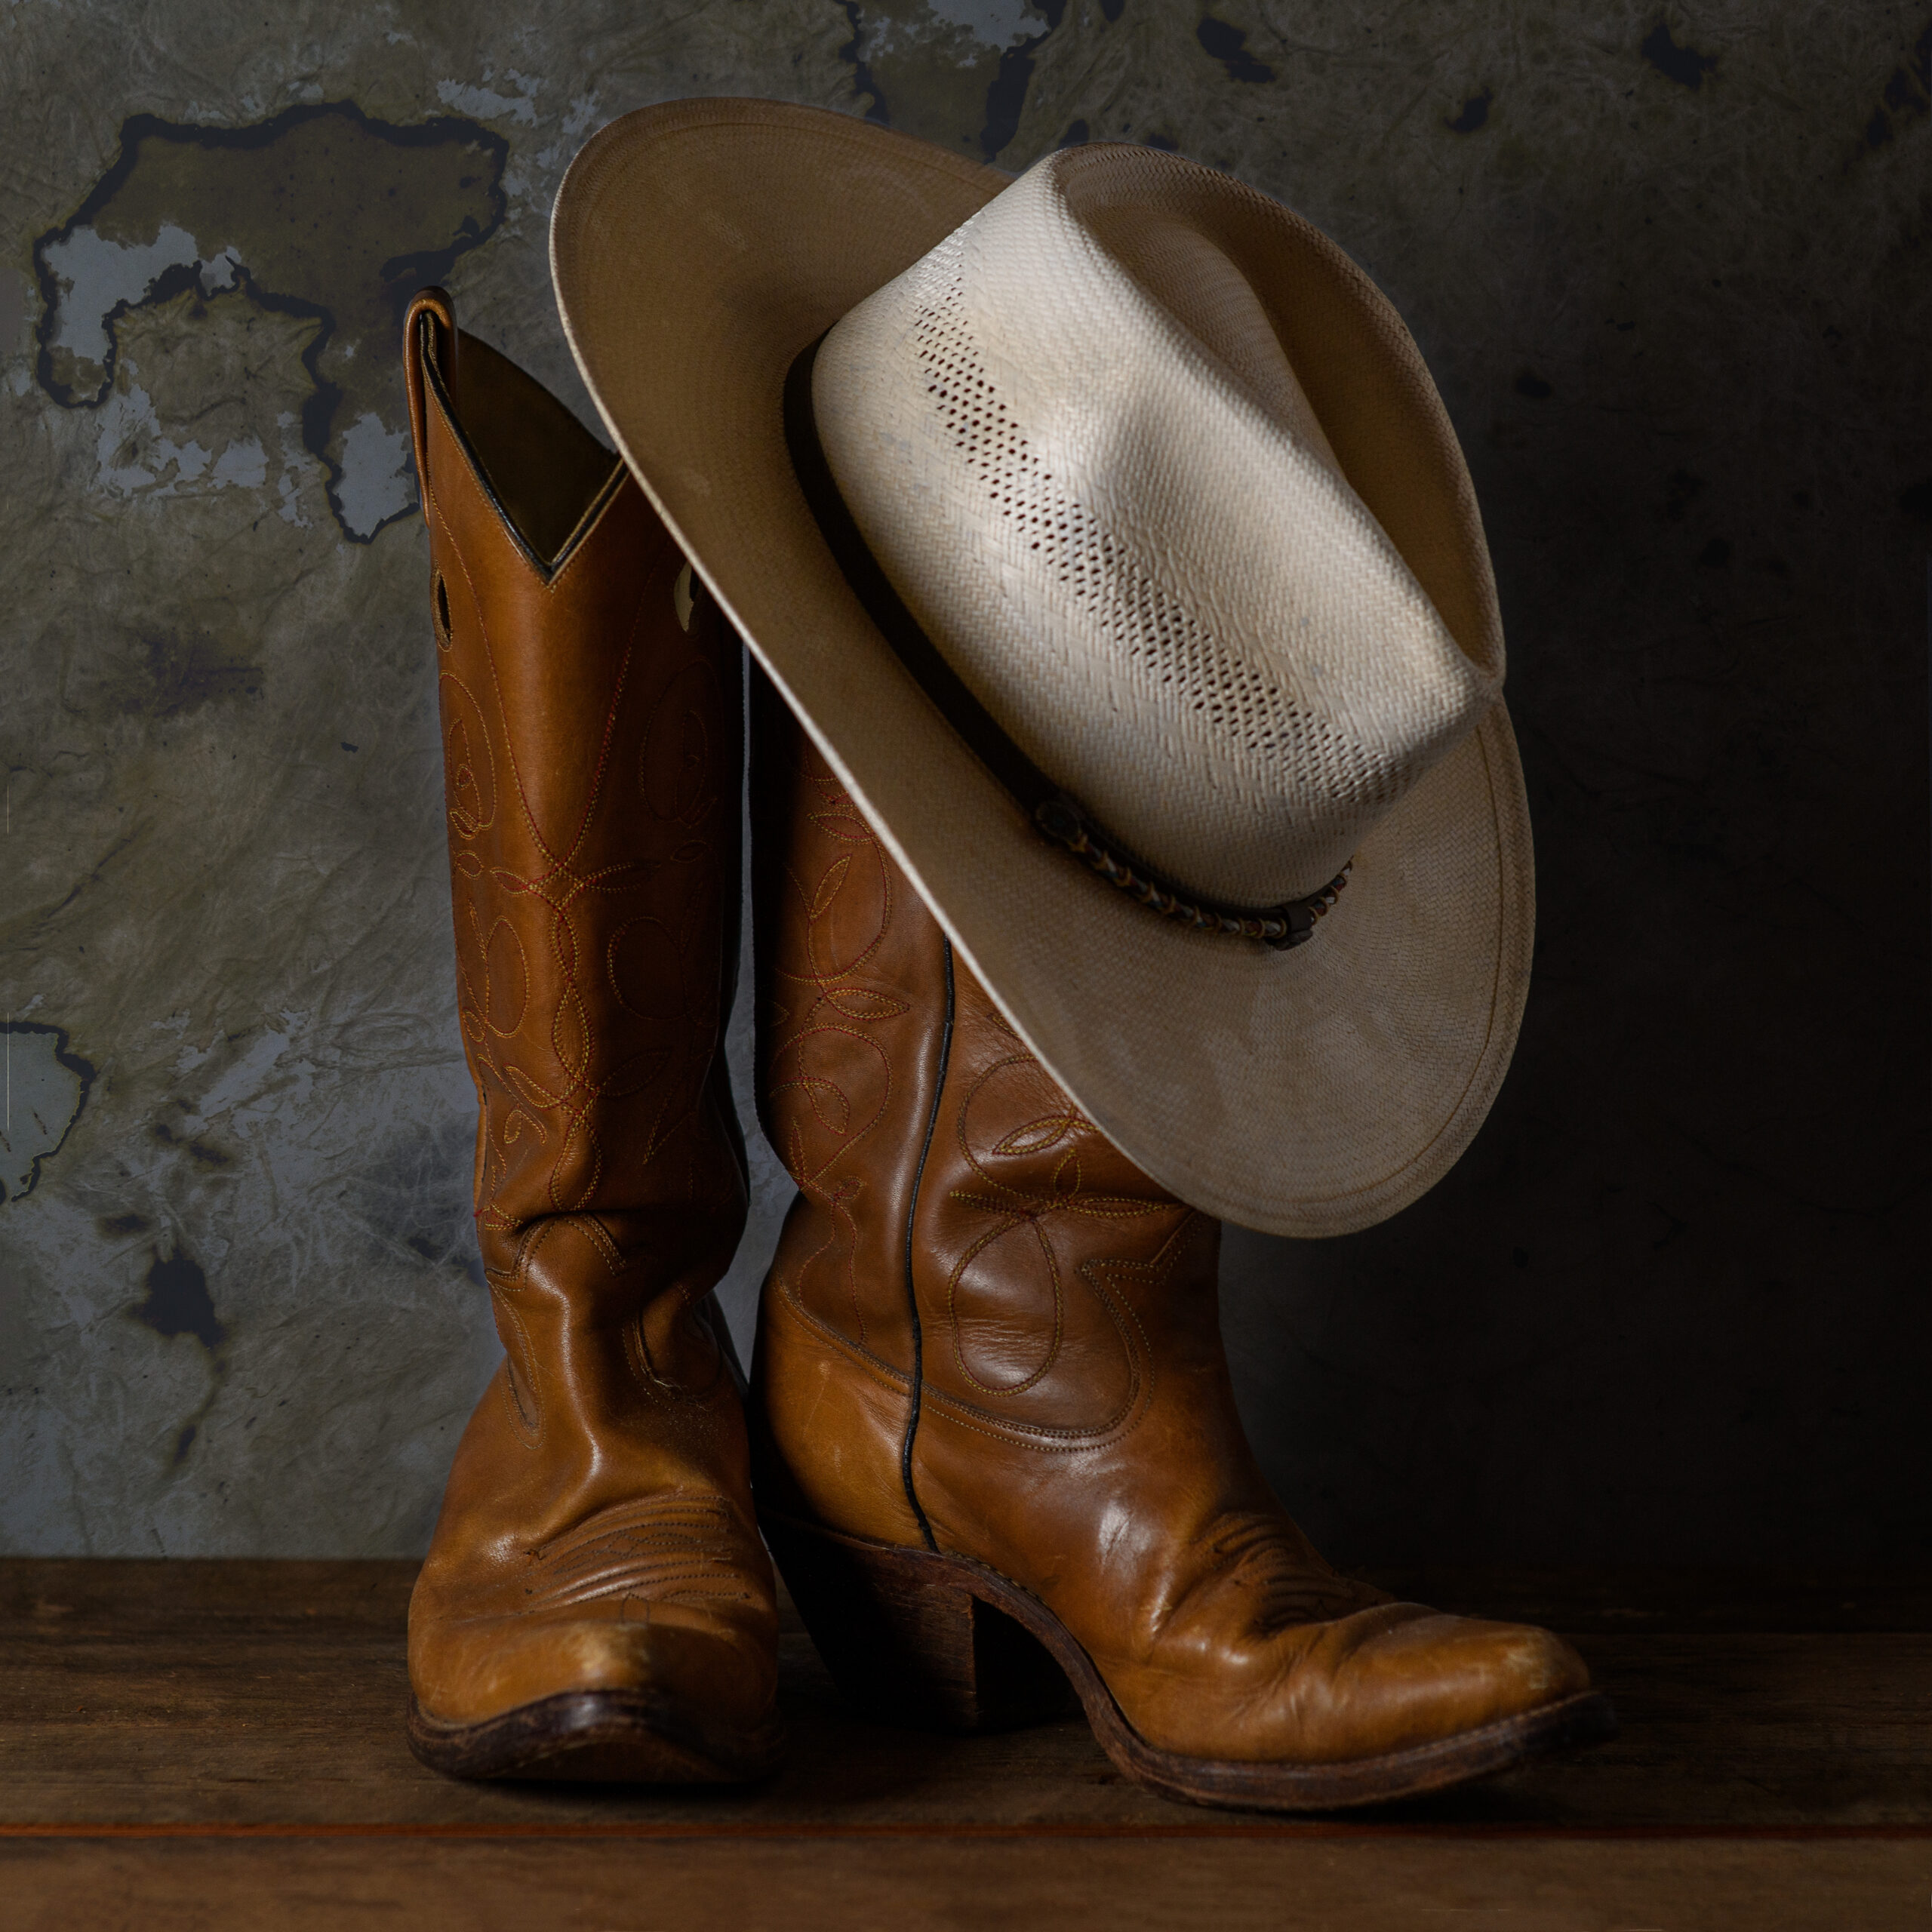 Line Dancing Classes at the Brentwood Library, Cowboy Hat and Boots.